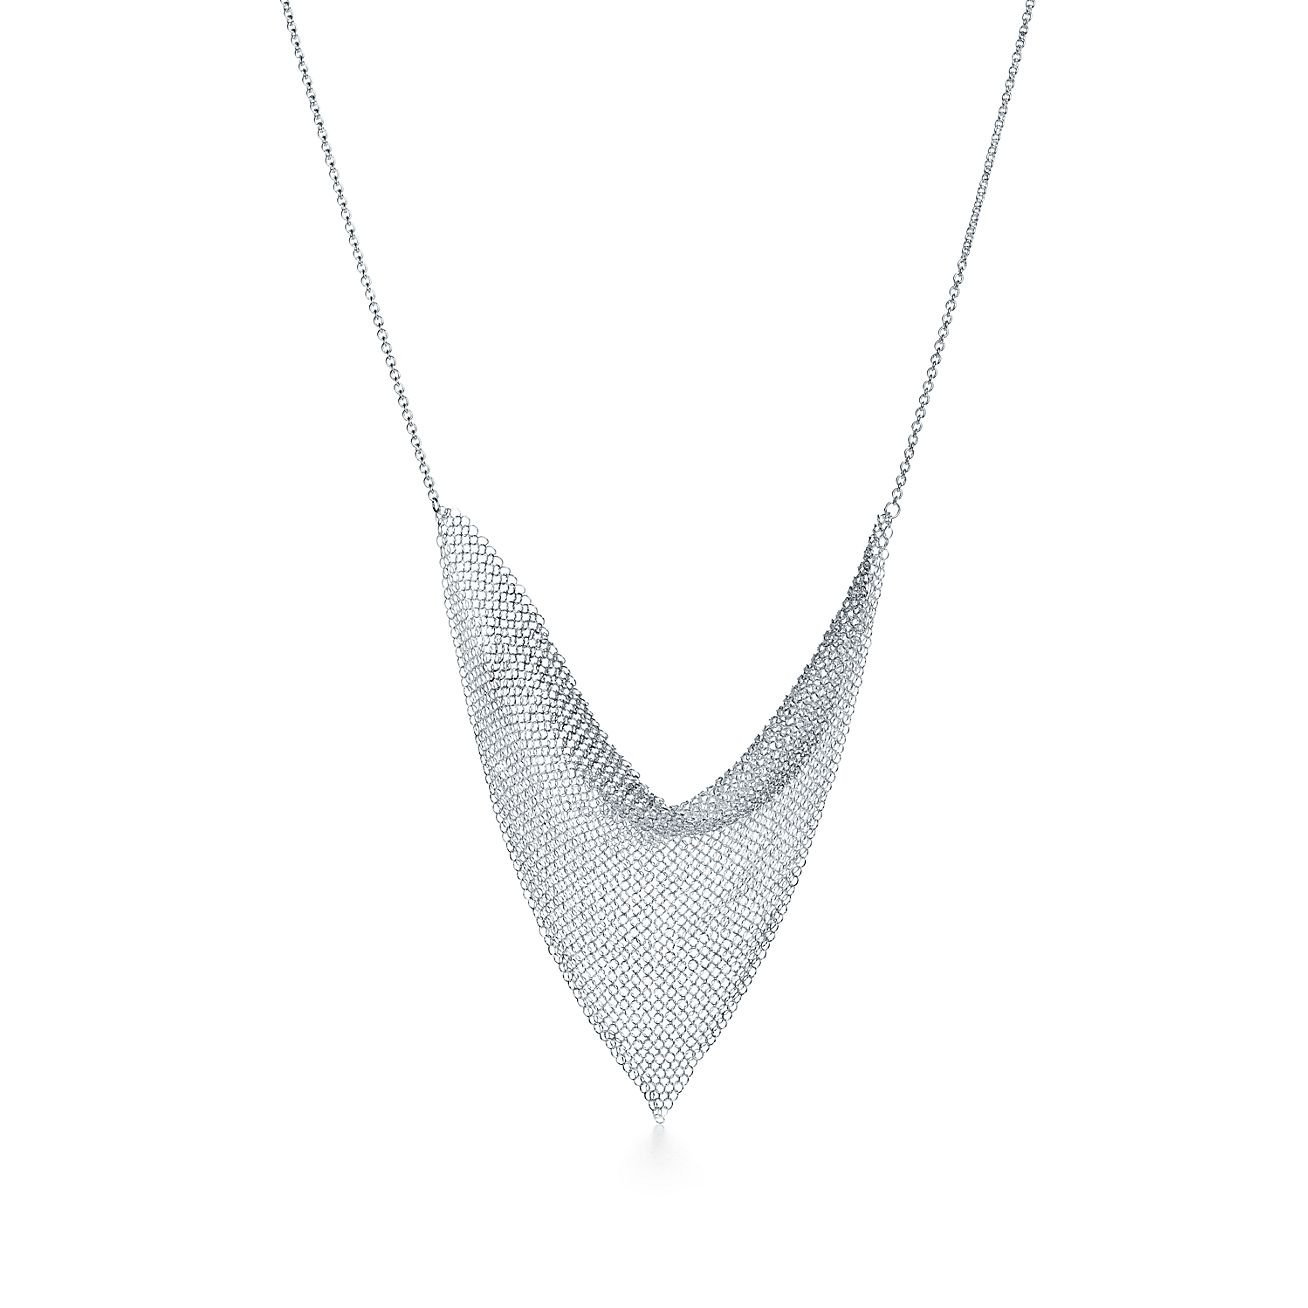 Buy [Used B/Standard] Tiffany Elsa Peretti Mesh Scarf Silver 925 Women's  Necklace 20421498 from Japan - Buy authentic Plus exclusive items from  Japan | ZenPlus